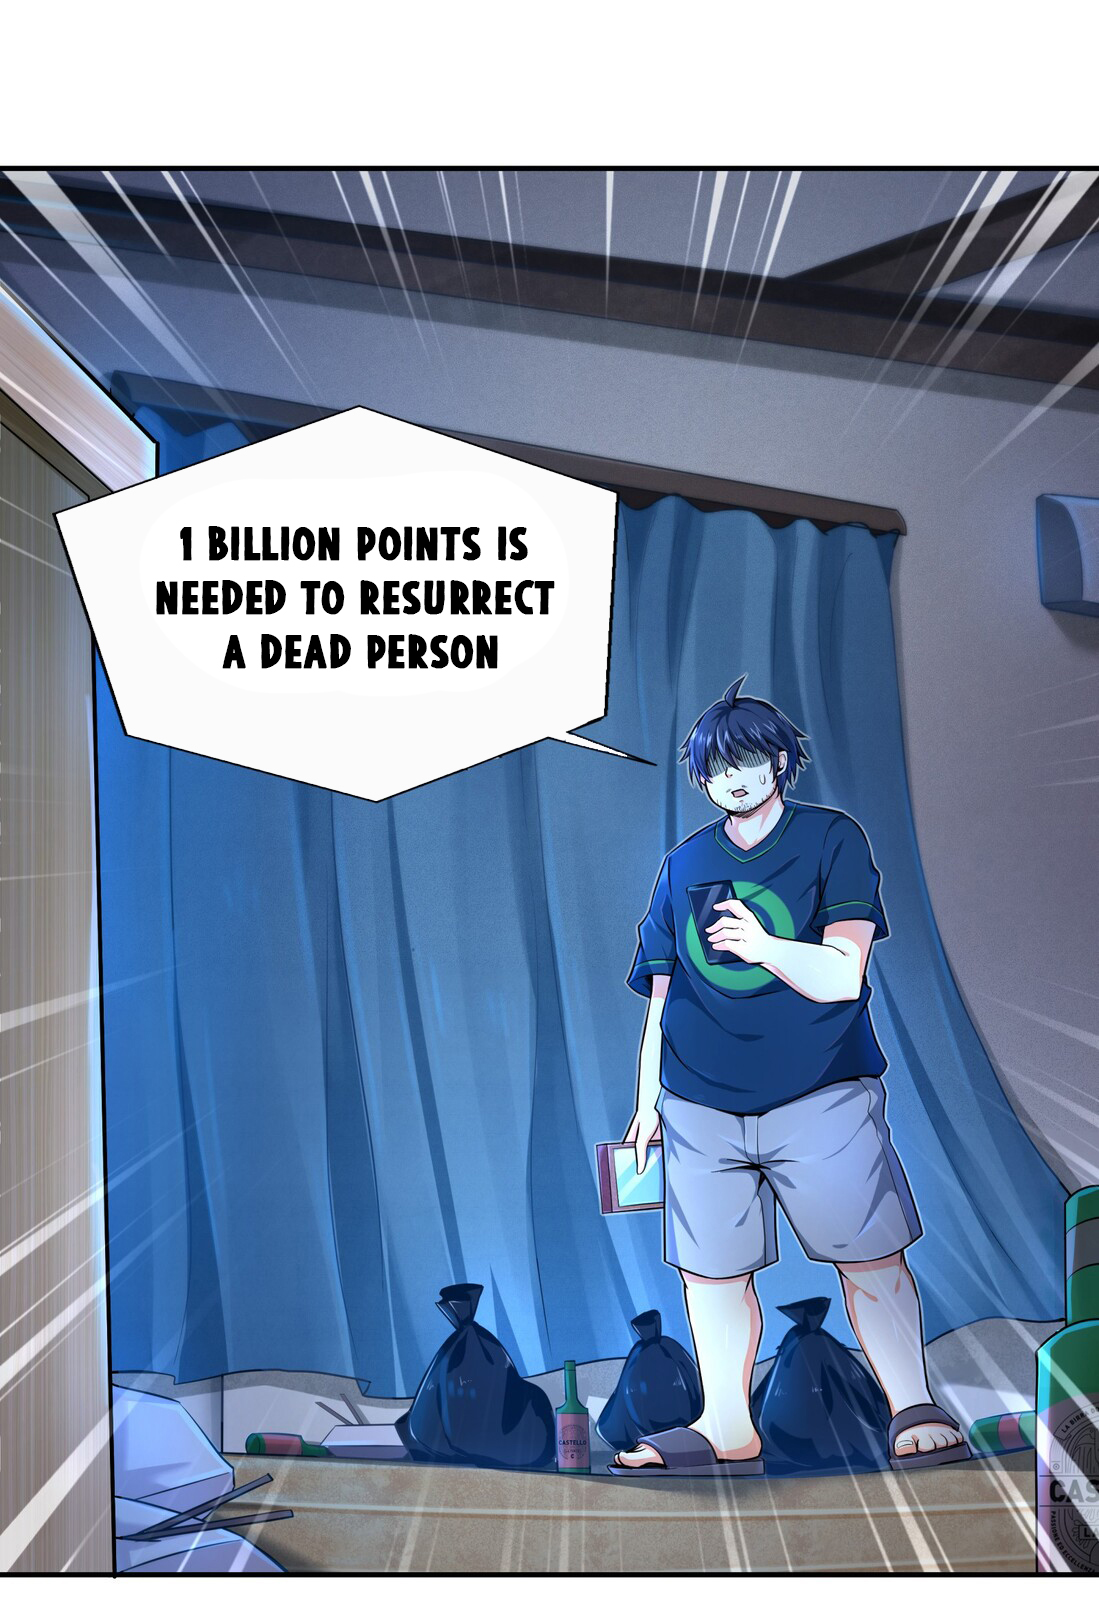 Target 1 billion points! Open the ultimate game of second life! Ch. 1.1